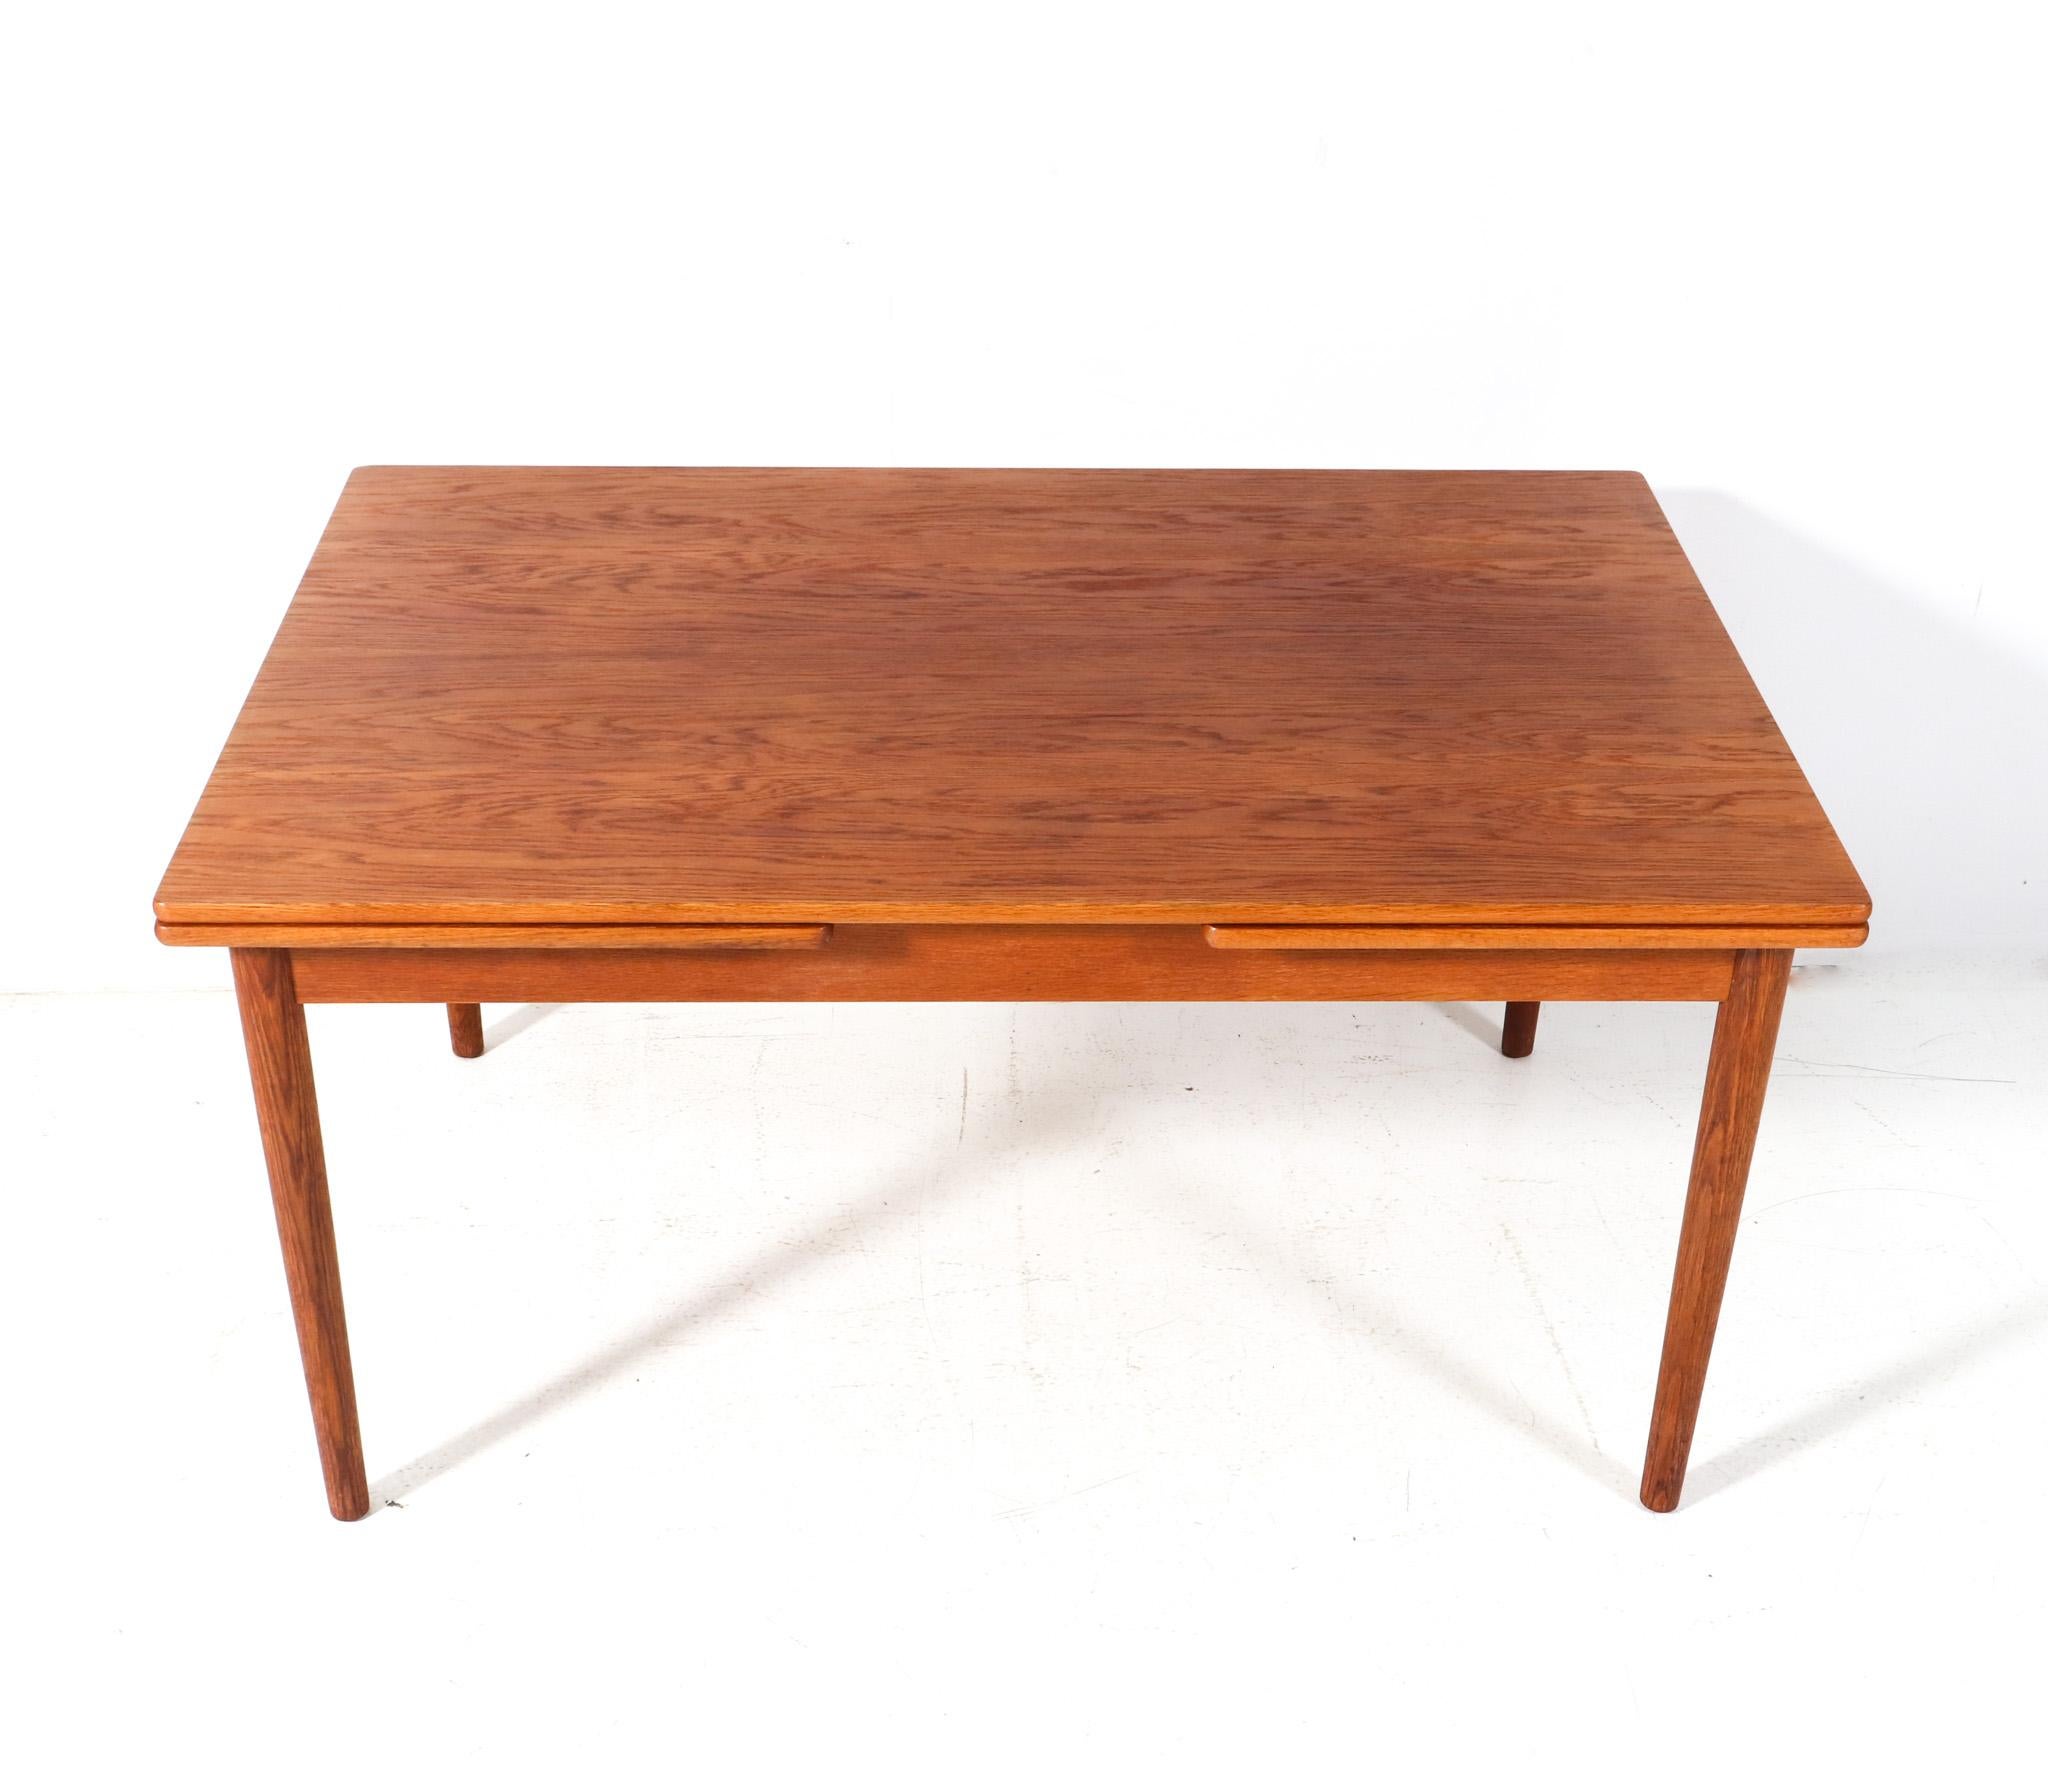  Mid-Century Modern Teak Extendable Dining Room Table Mo. 215 by Farstrup, 1960s In Good Condition For Sale In Amsterdam, NL